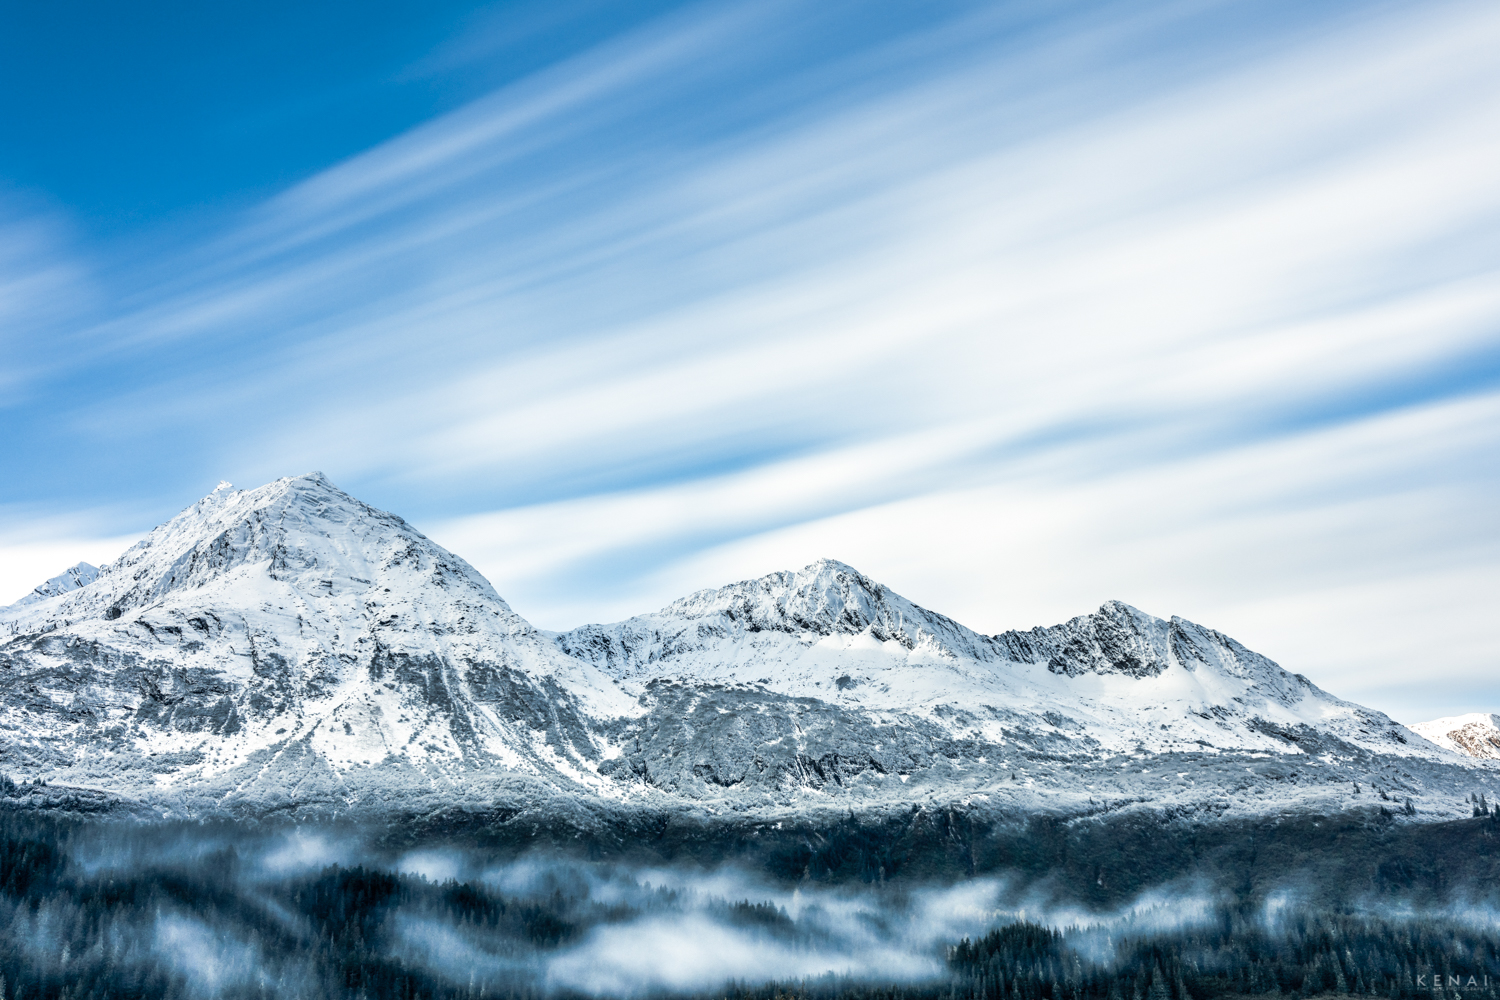 Clouds blur the blue sky in this long exposure photo of mountains near Valdez, Alaska